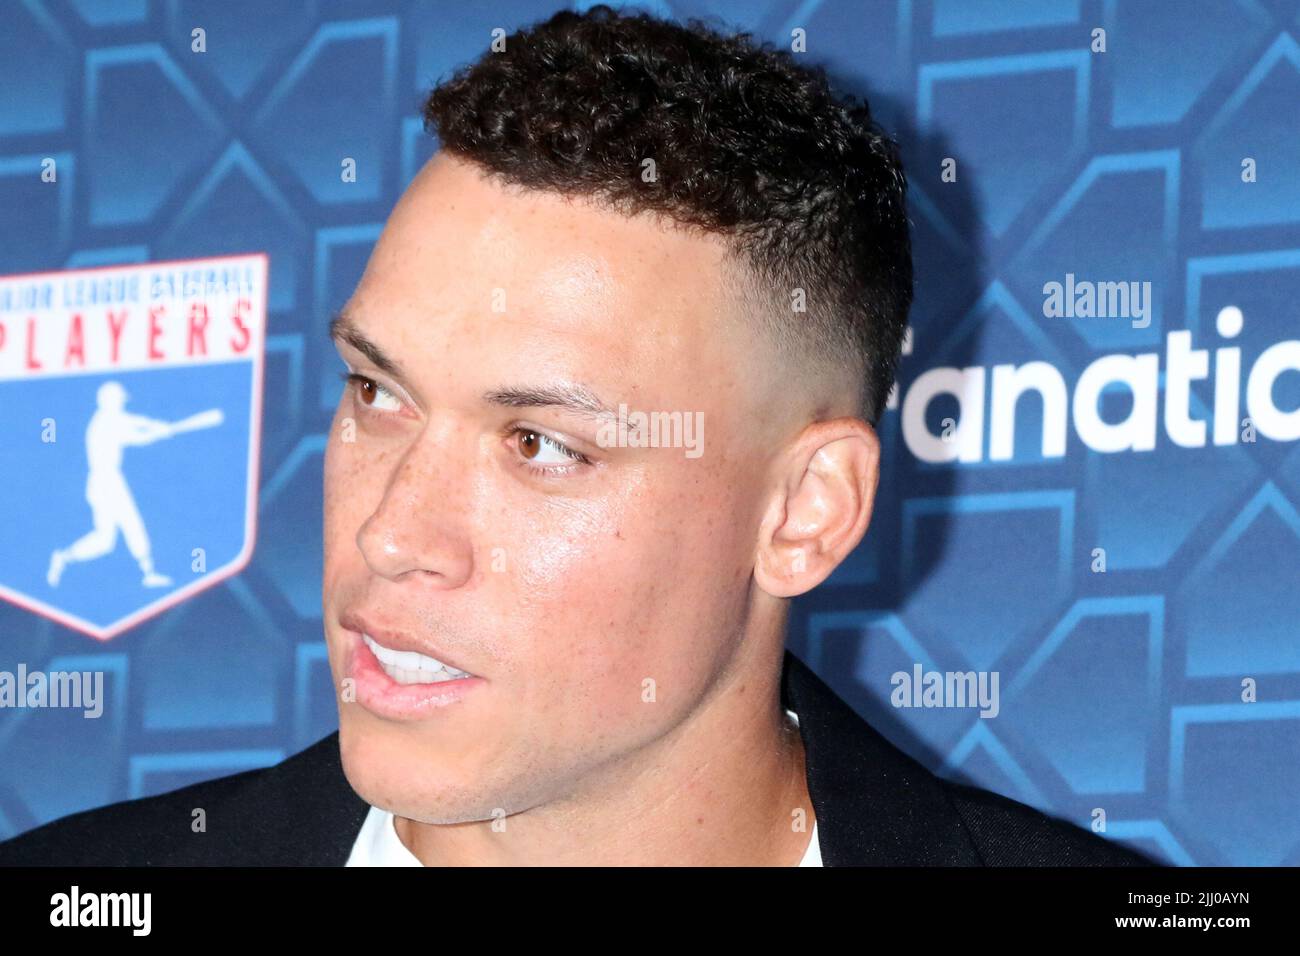 LOS ANGELES - JUL 18: Aaron Judge at the MLBPA x Fanatics Players Party  at City Market Social House on July 18, 2022 in Los Angeles, CA Stock Photo  - Alamy